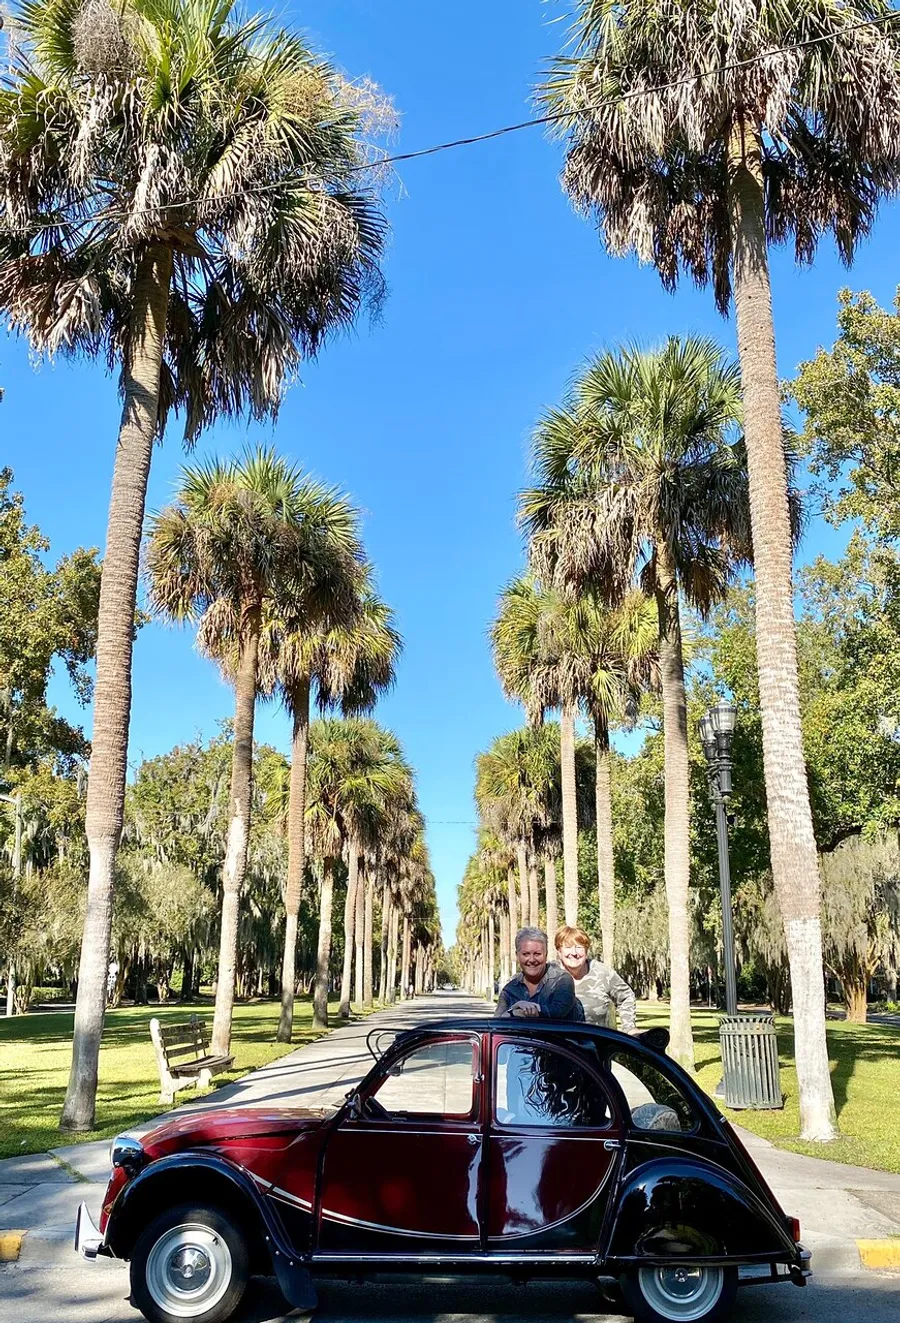 Two people are smiling and popping their heads through the open sunroof of a classic red and black car, parked under a row of palm trees on a sunny day.